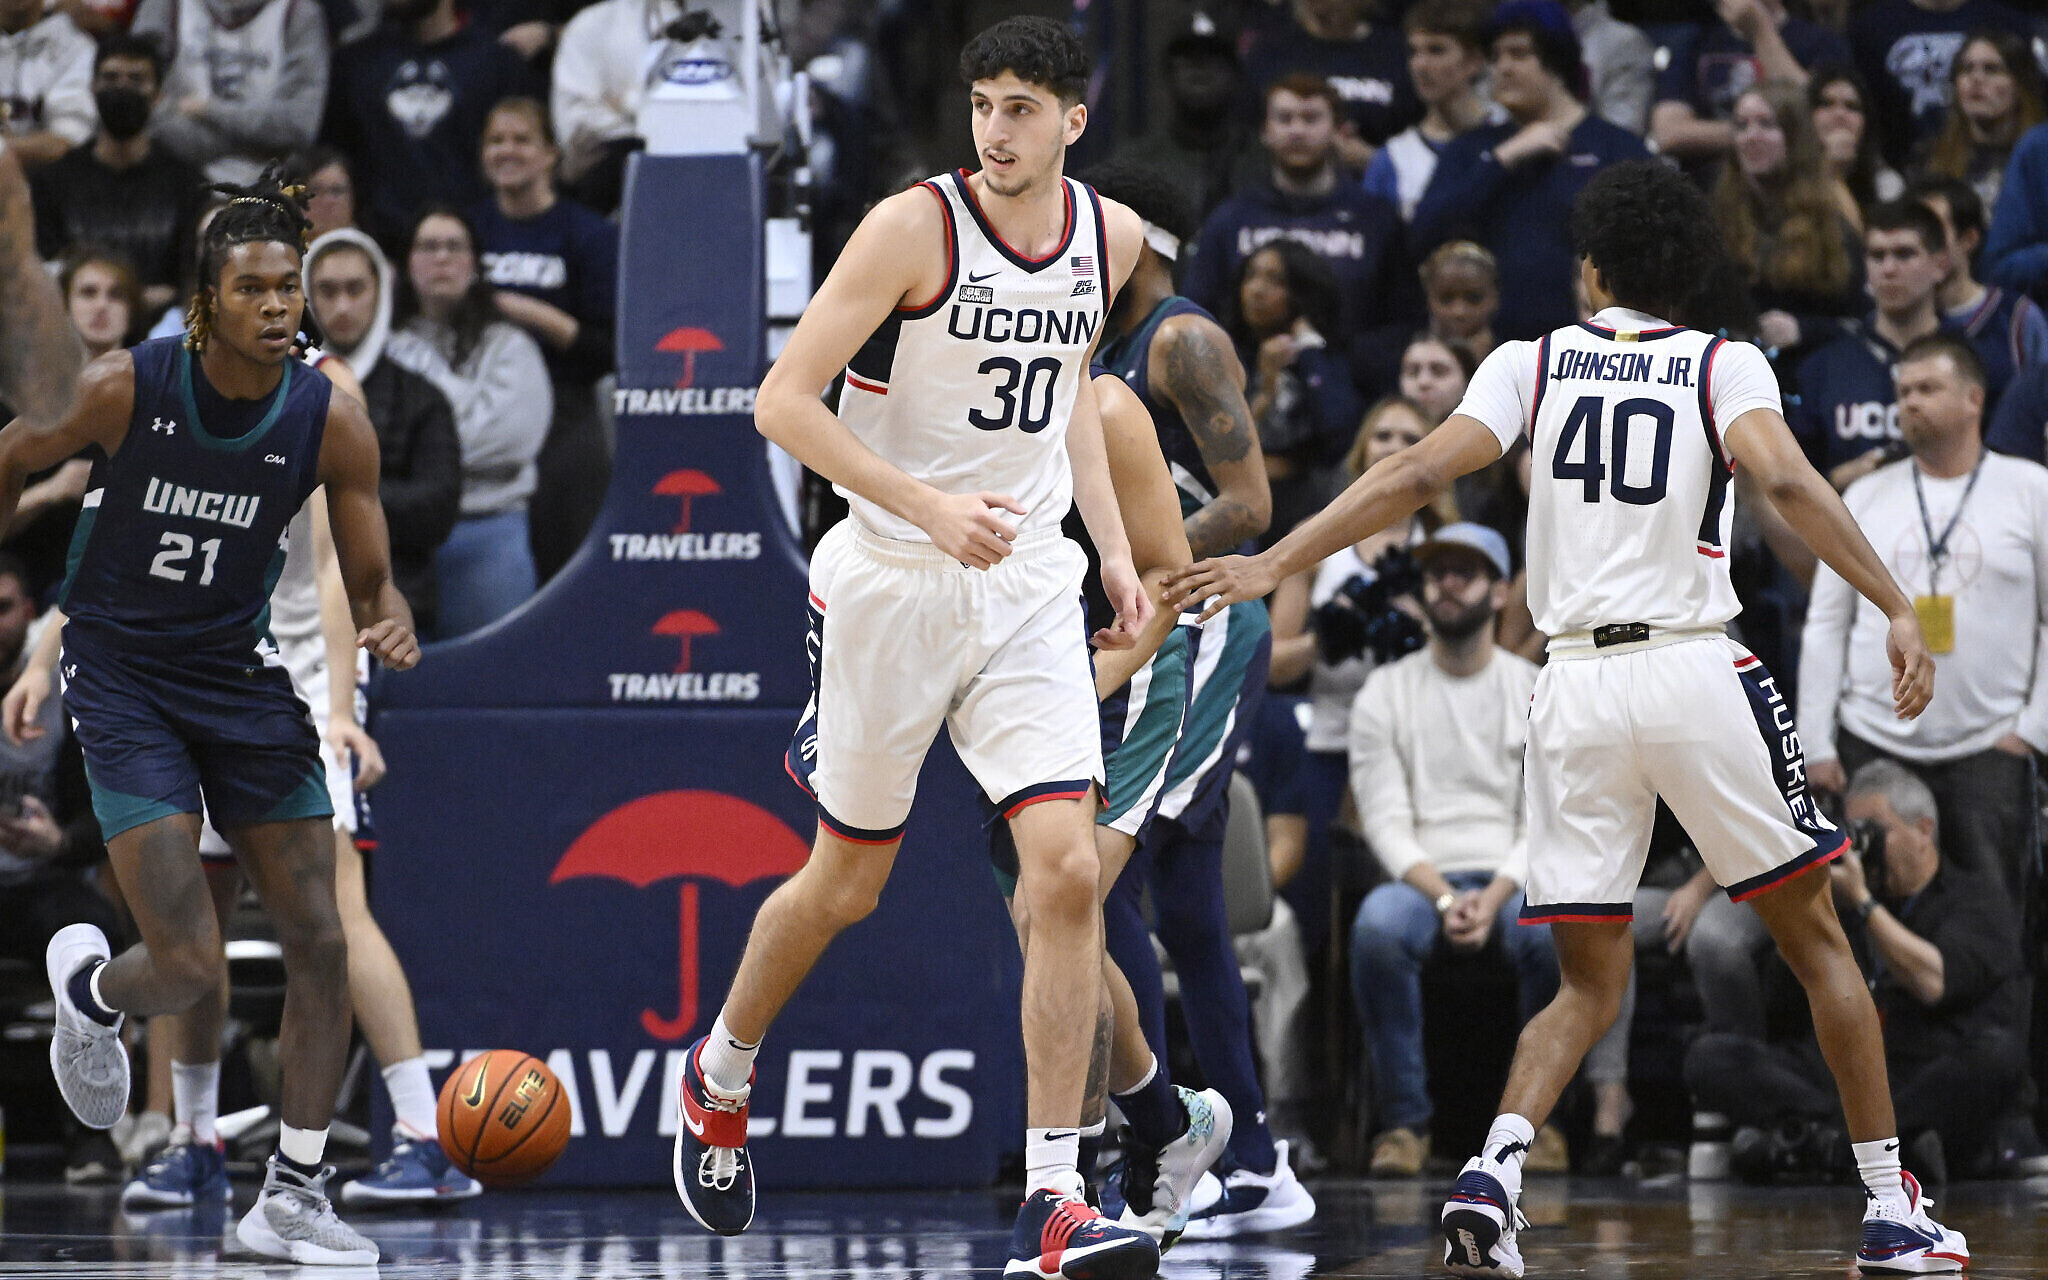 UConn Men's Basketball on X: The Business Trip Continues